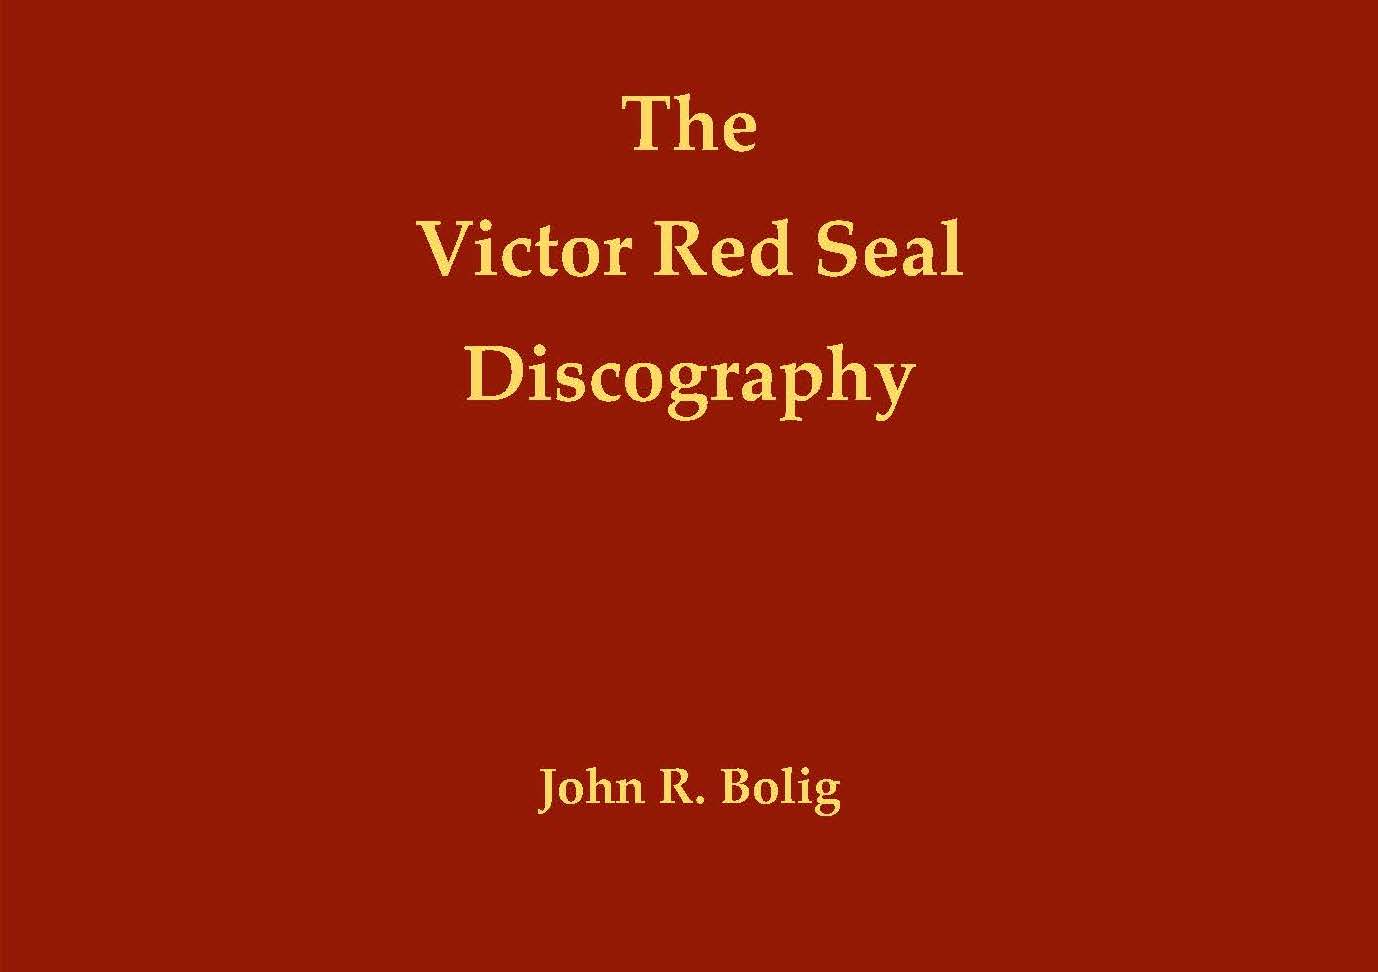 Victor Red Seal Discography